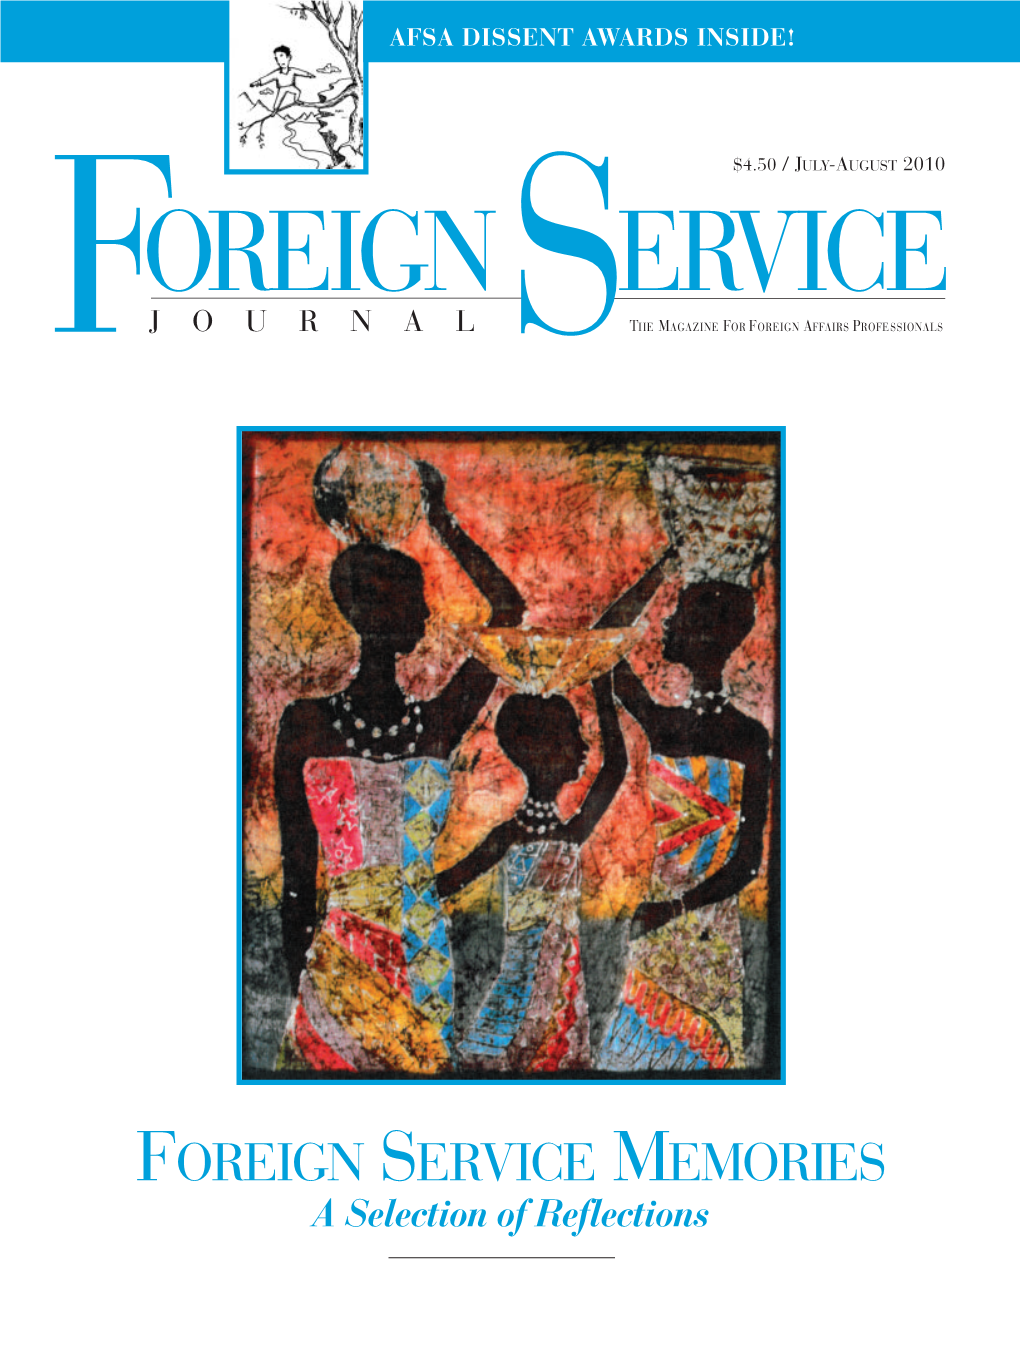 The Foreign Service Journal, July-August 2010